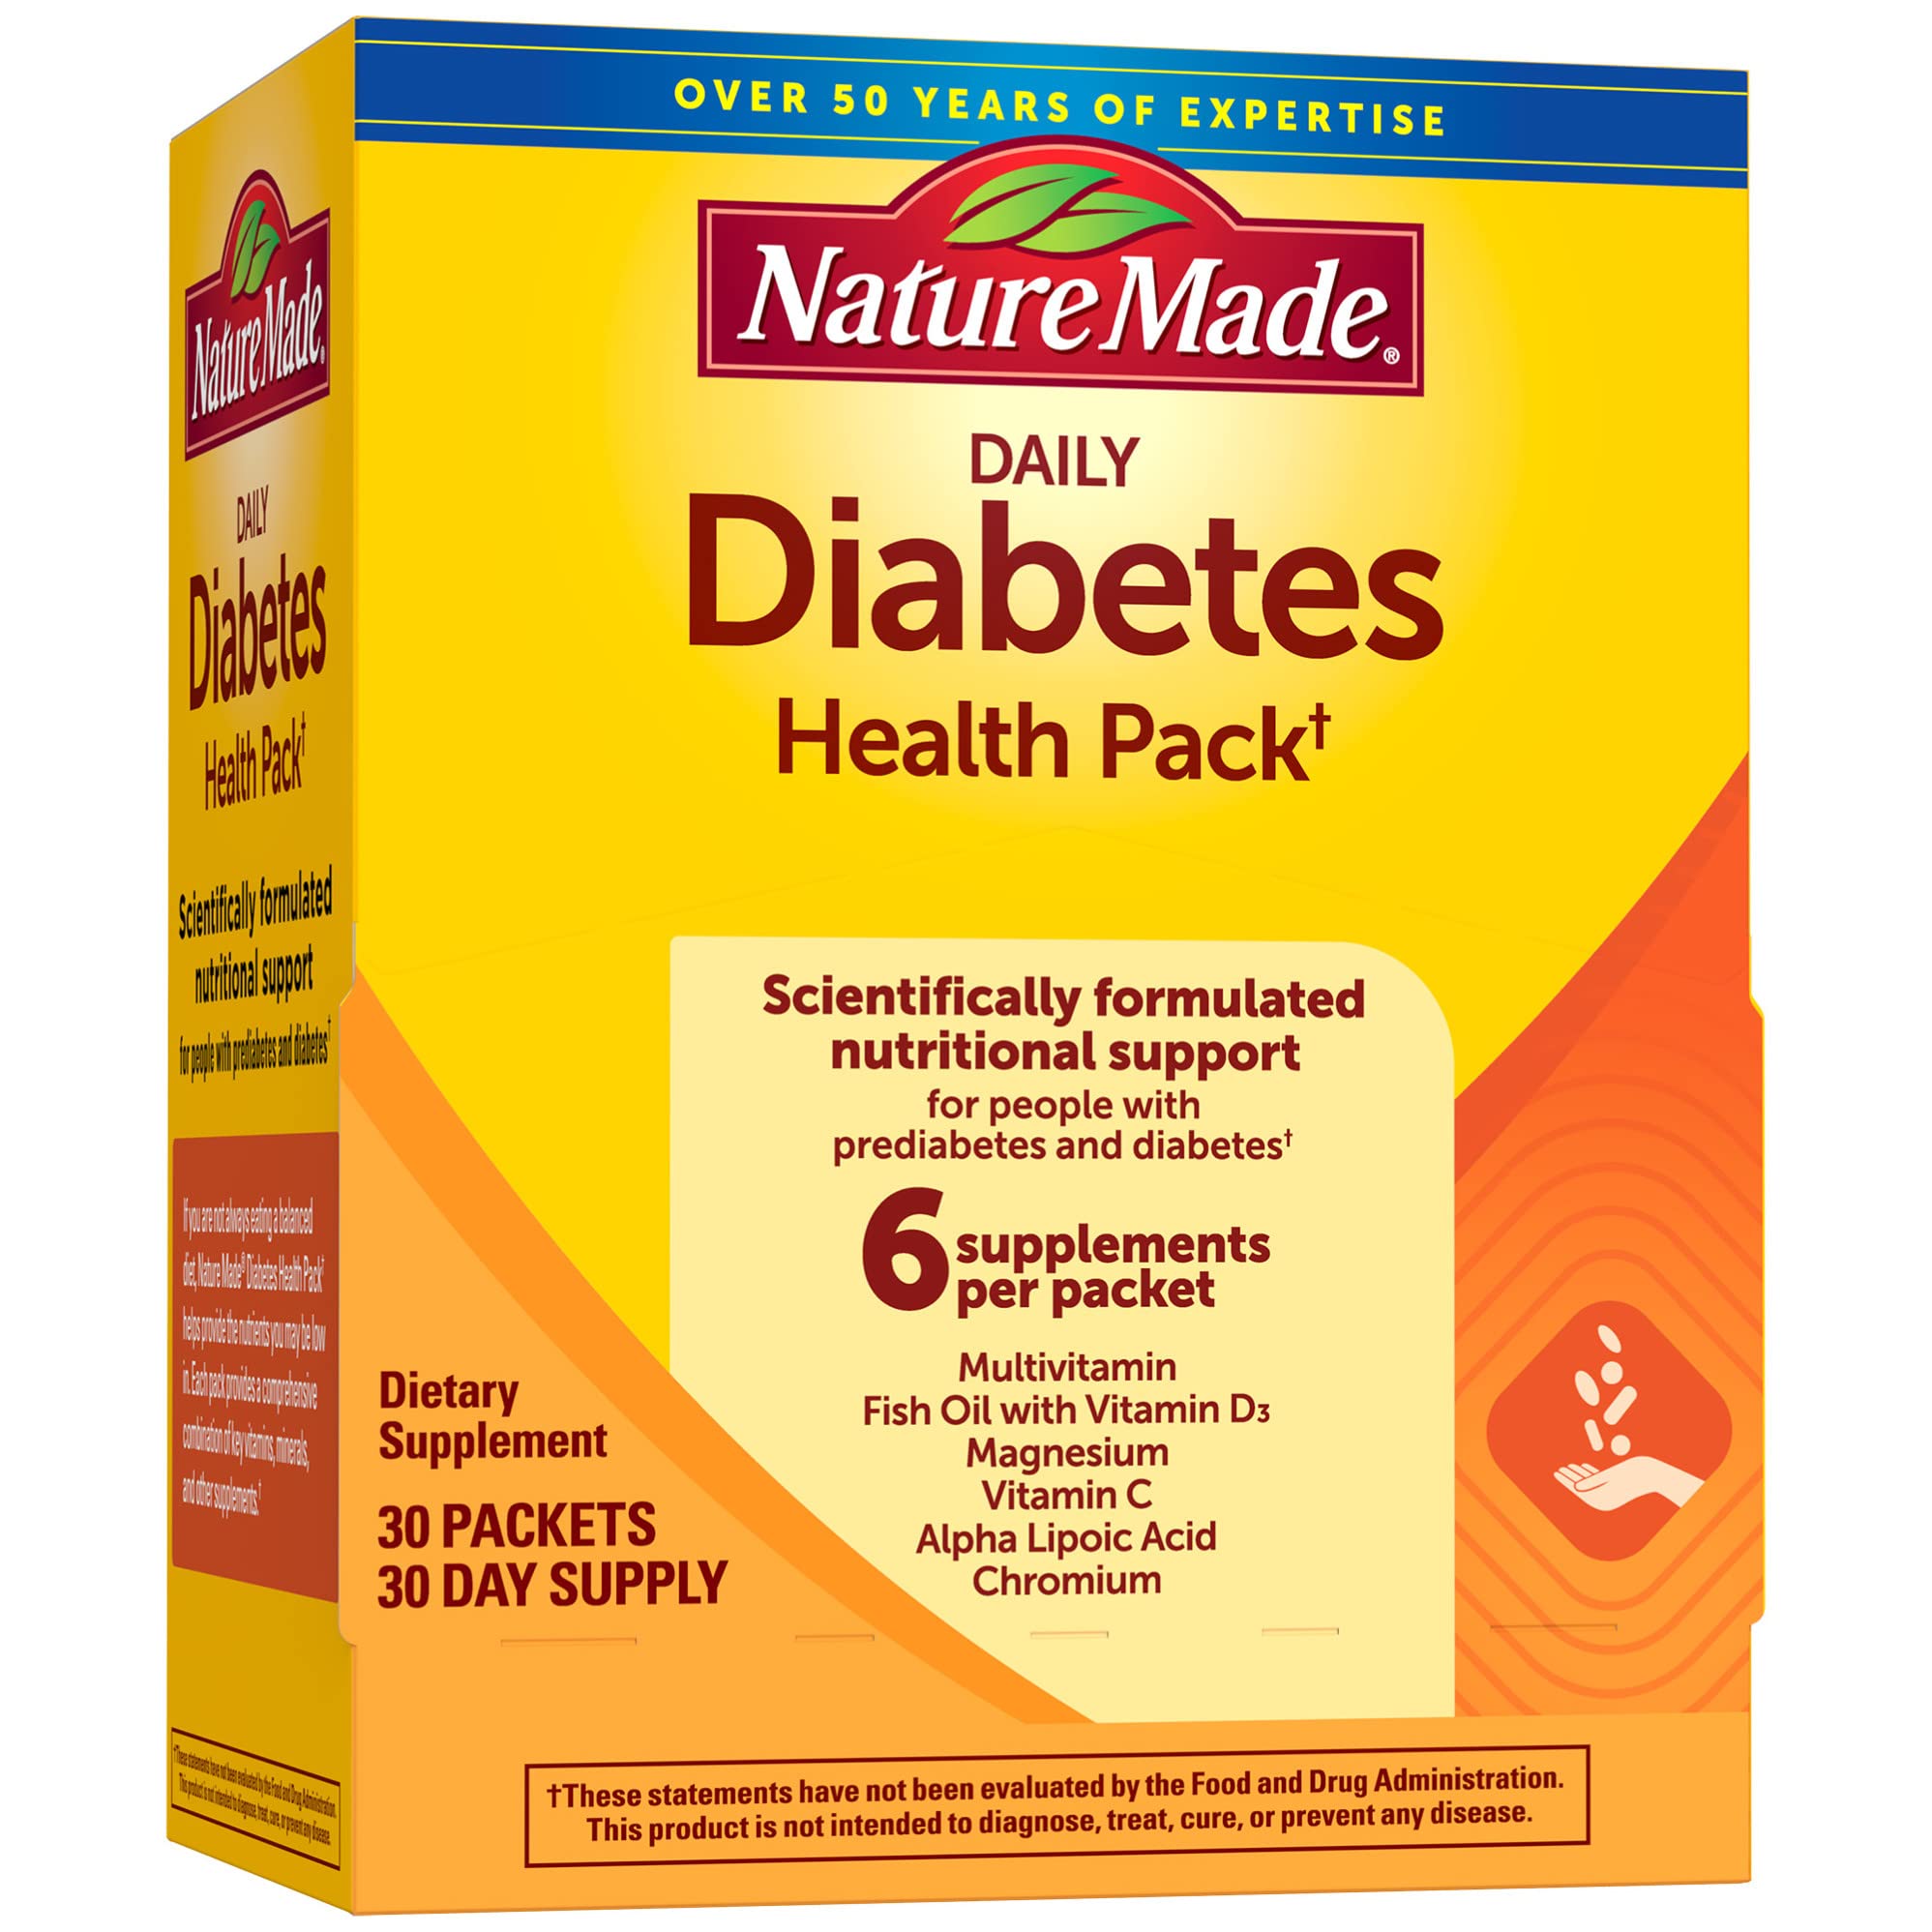 Nature Made Daily Diabetes Health Pack, Dietary Supplement for Nutritional Support, 30 Packets, 30 Day Supply